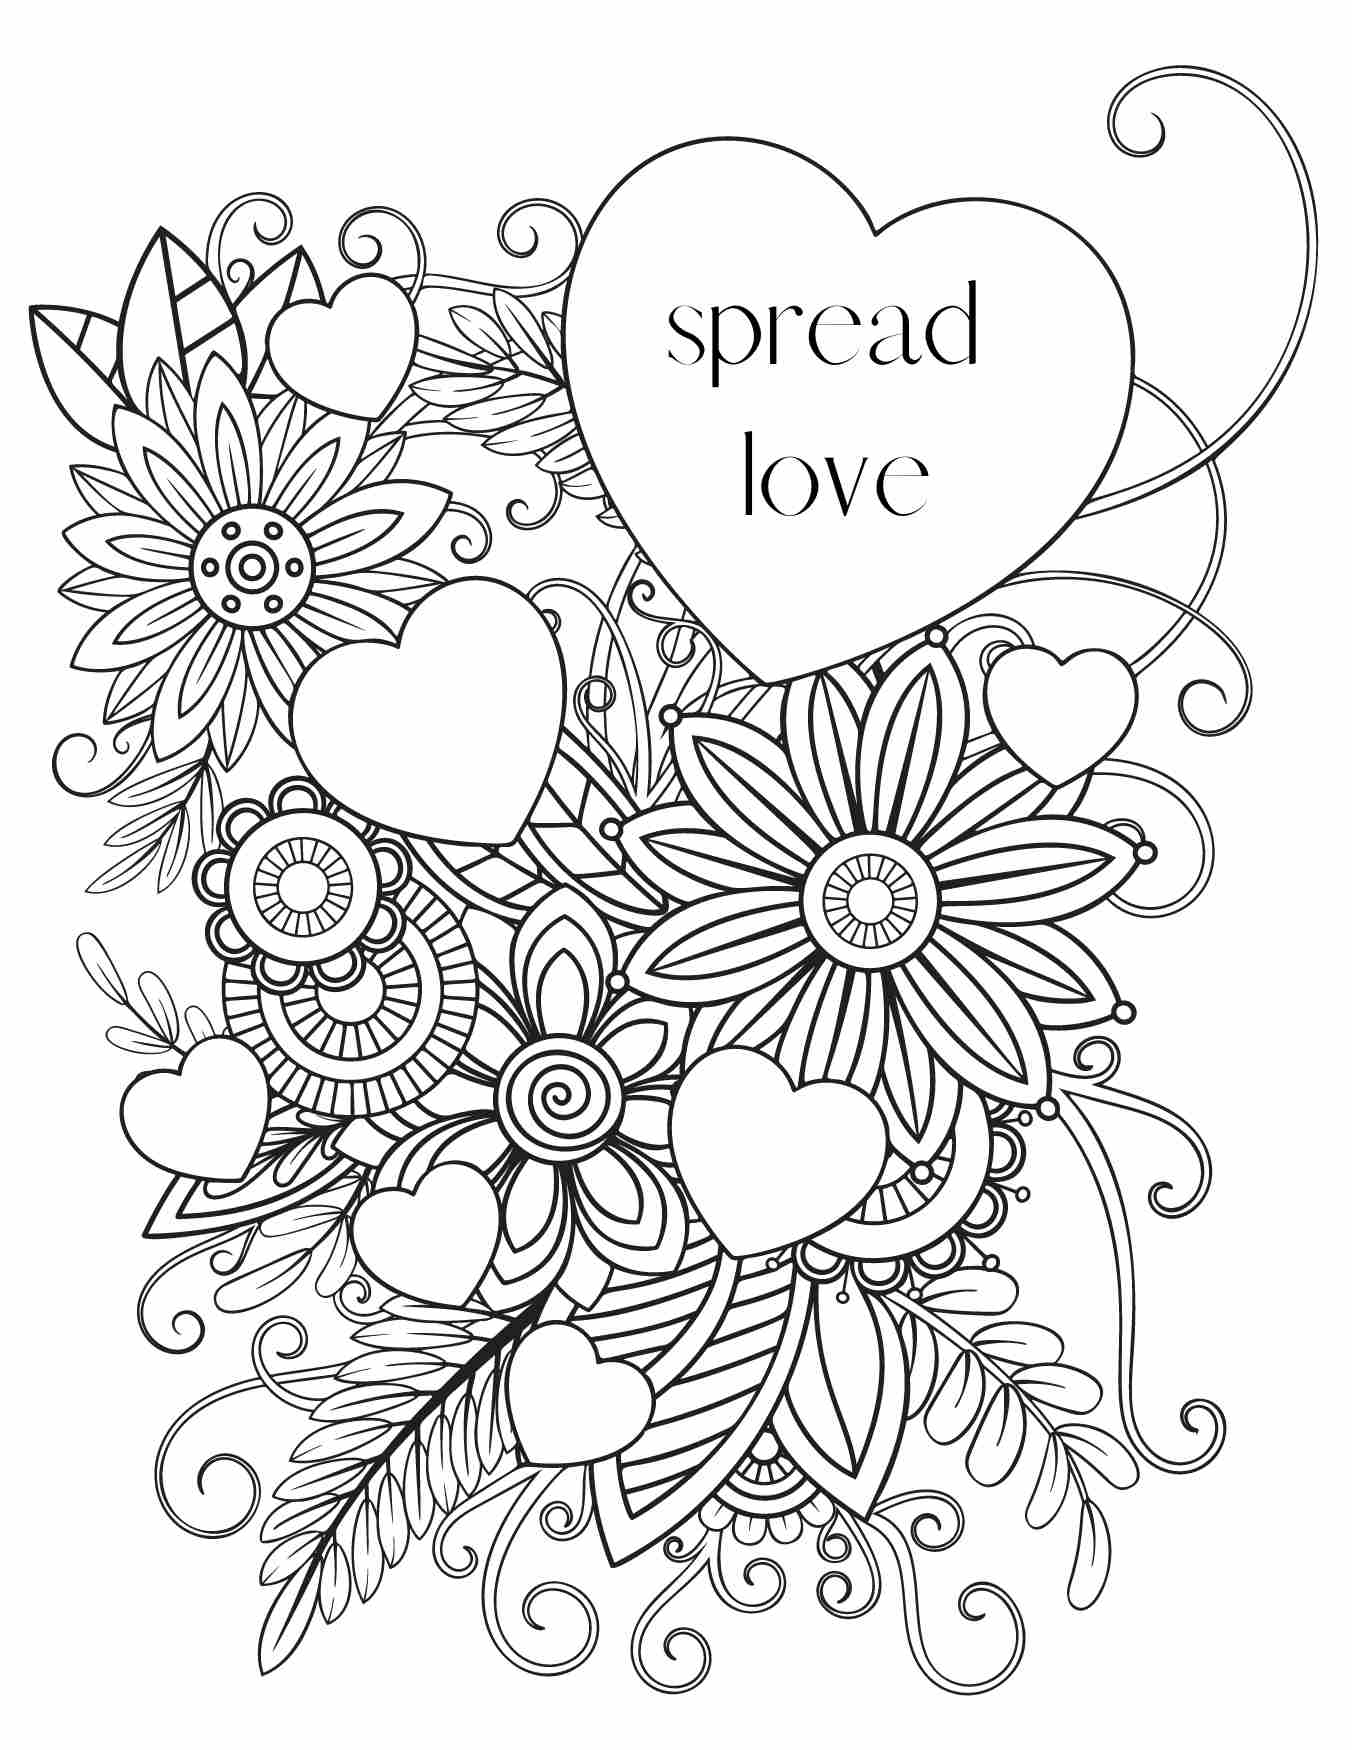 A pretty delicate coloring page design with hearts and abstract flowers. A heart at the top has the words "spread love" inside. 